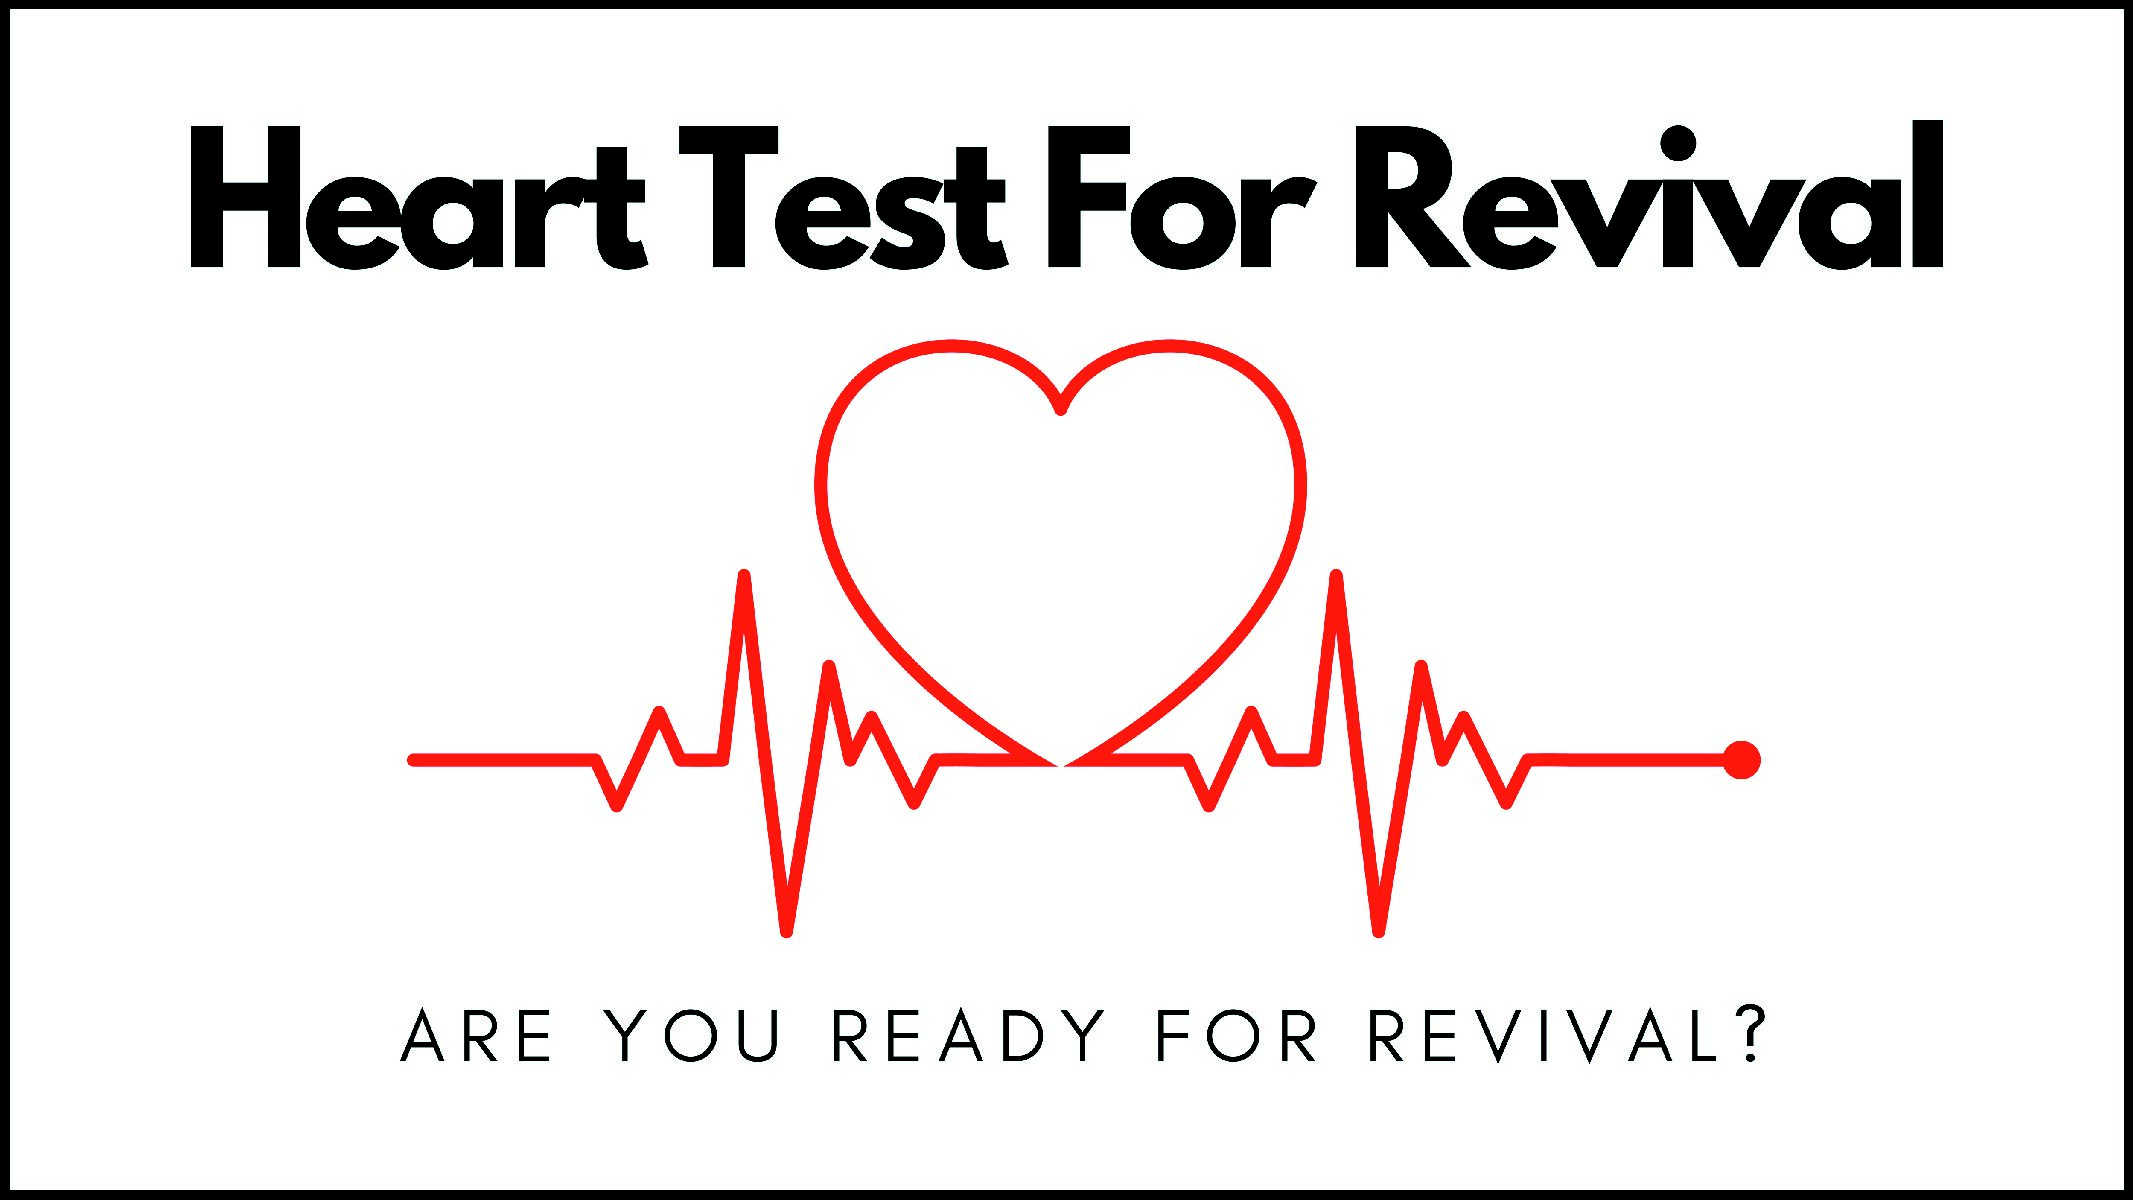 A Heart Test For Revival